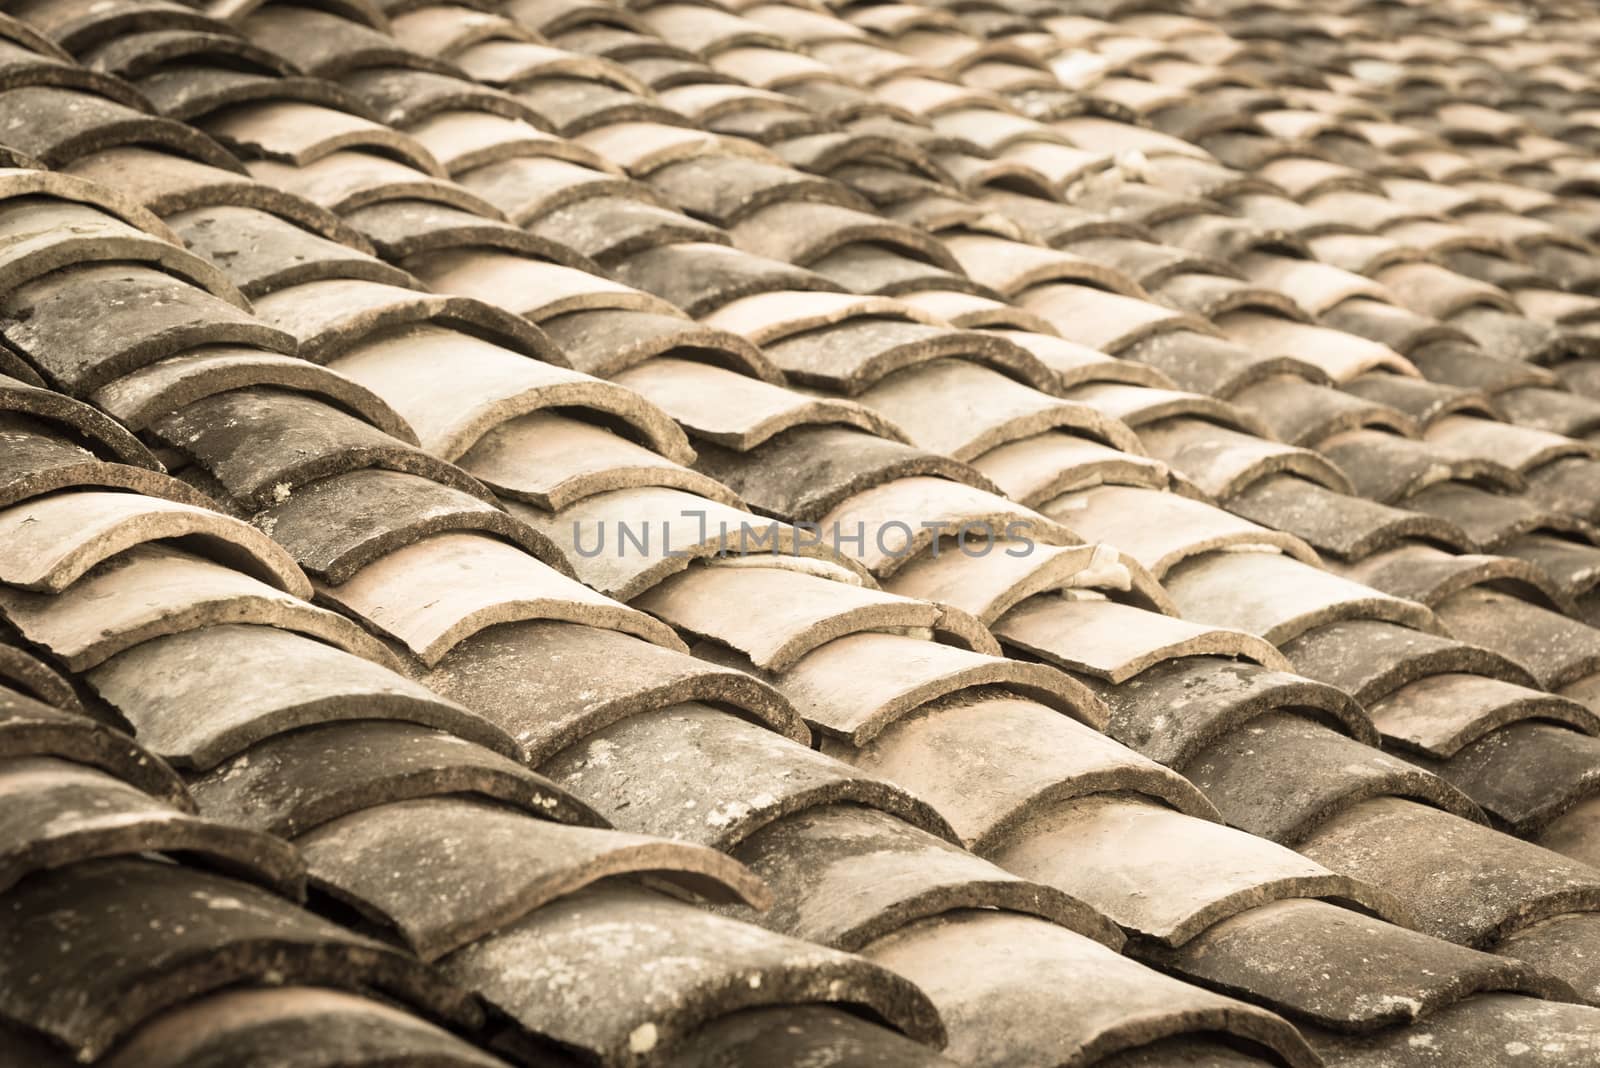 Vintage tone curved clay tiled roof in various colors from an old house in North Vietnam, late afternoon light. Ancient, weathered roofing surface, moss texture. Natural seamless pattern background